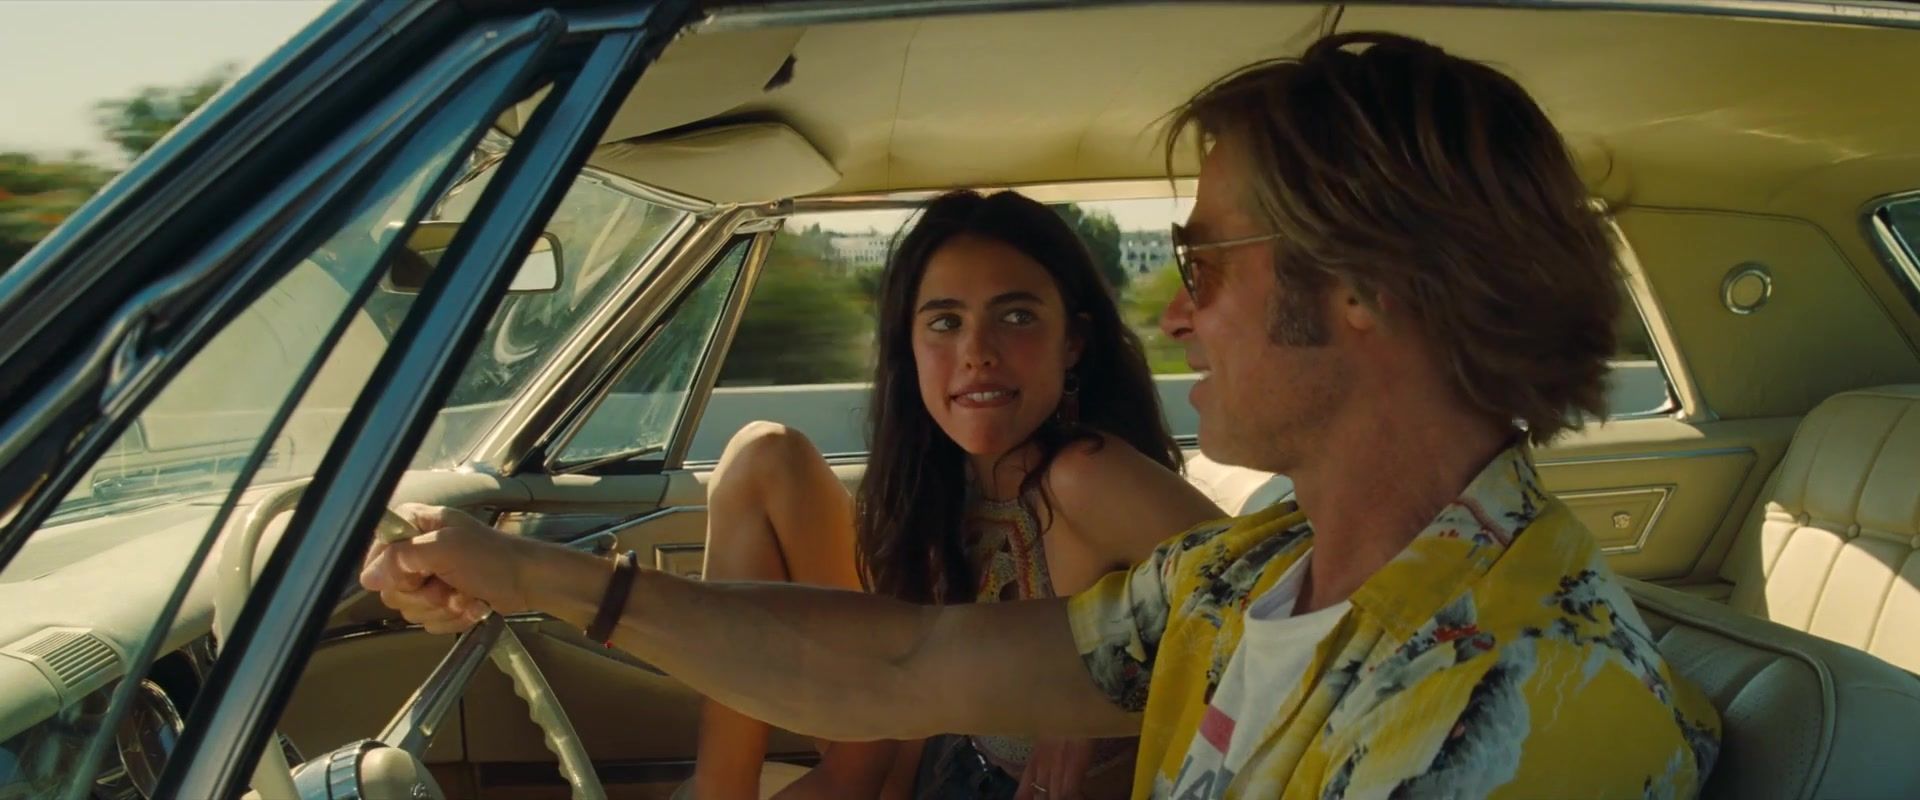 Pete Sexy Dakota Fanning, Margaret Qualley naked- Once Upon A Time In Hollywood (2019) Private - 1